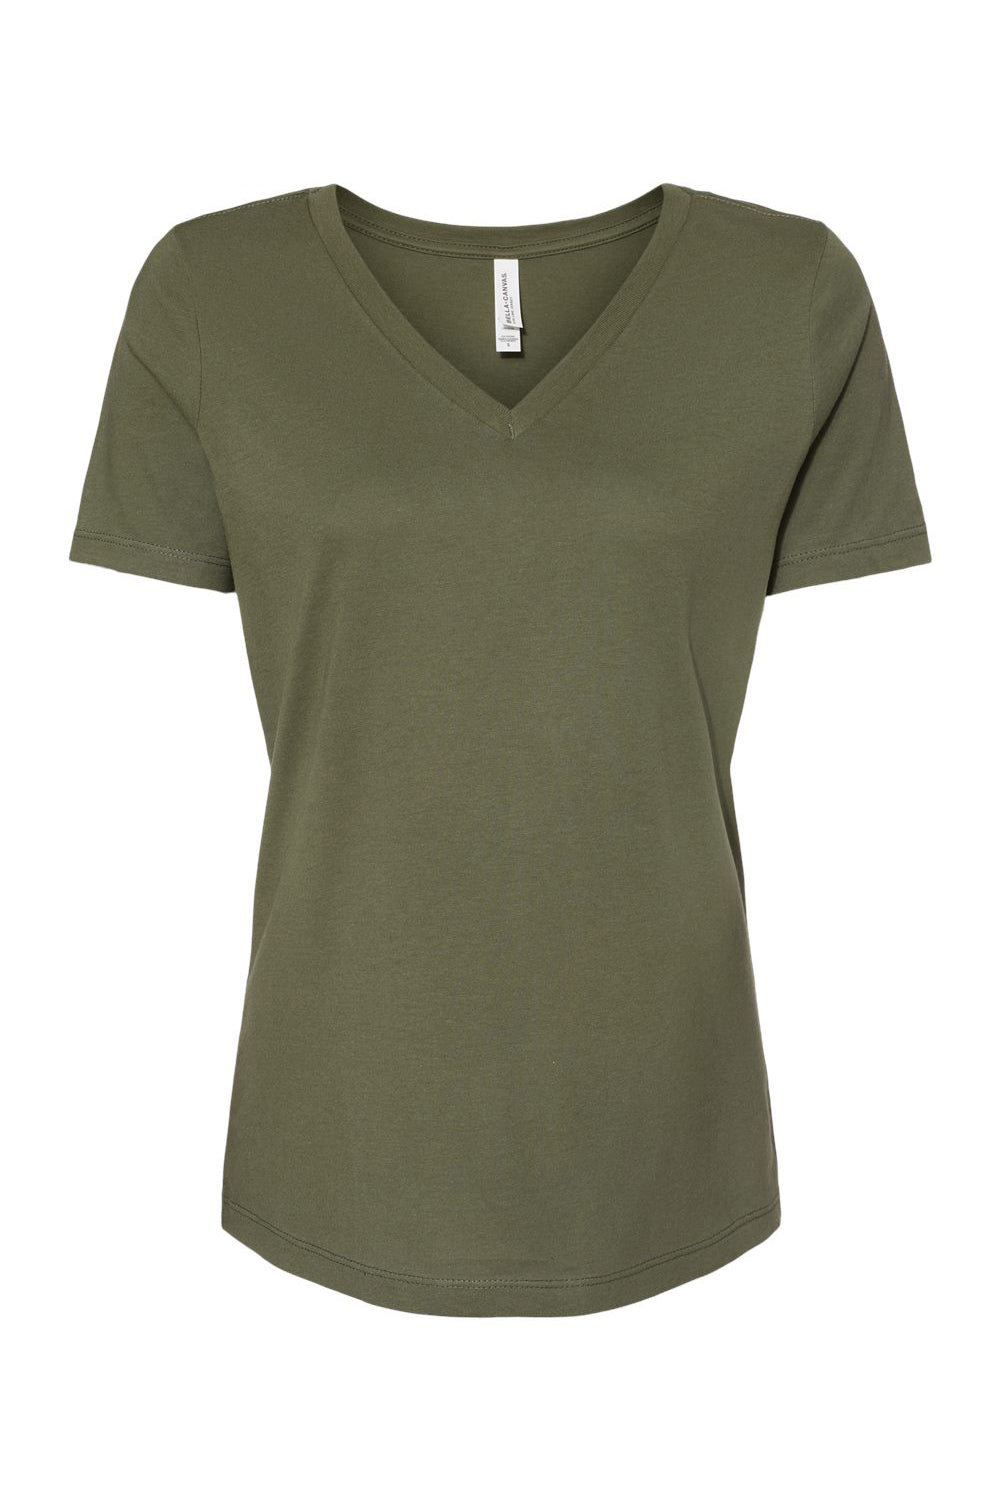 Bella + Canvas BC6405/6405 Womens Relaxed Jersey Short Sleeve V-Neck T-Shirt Military Green Flat Front